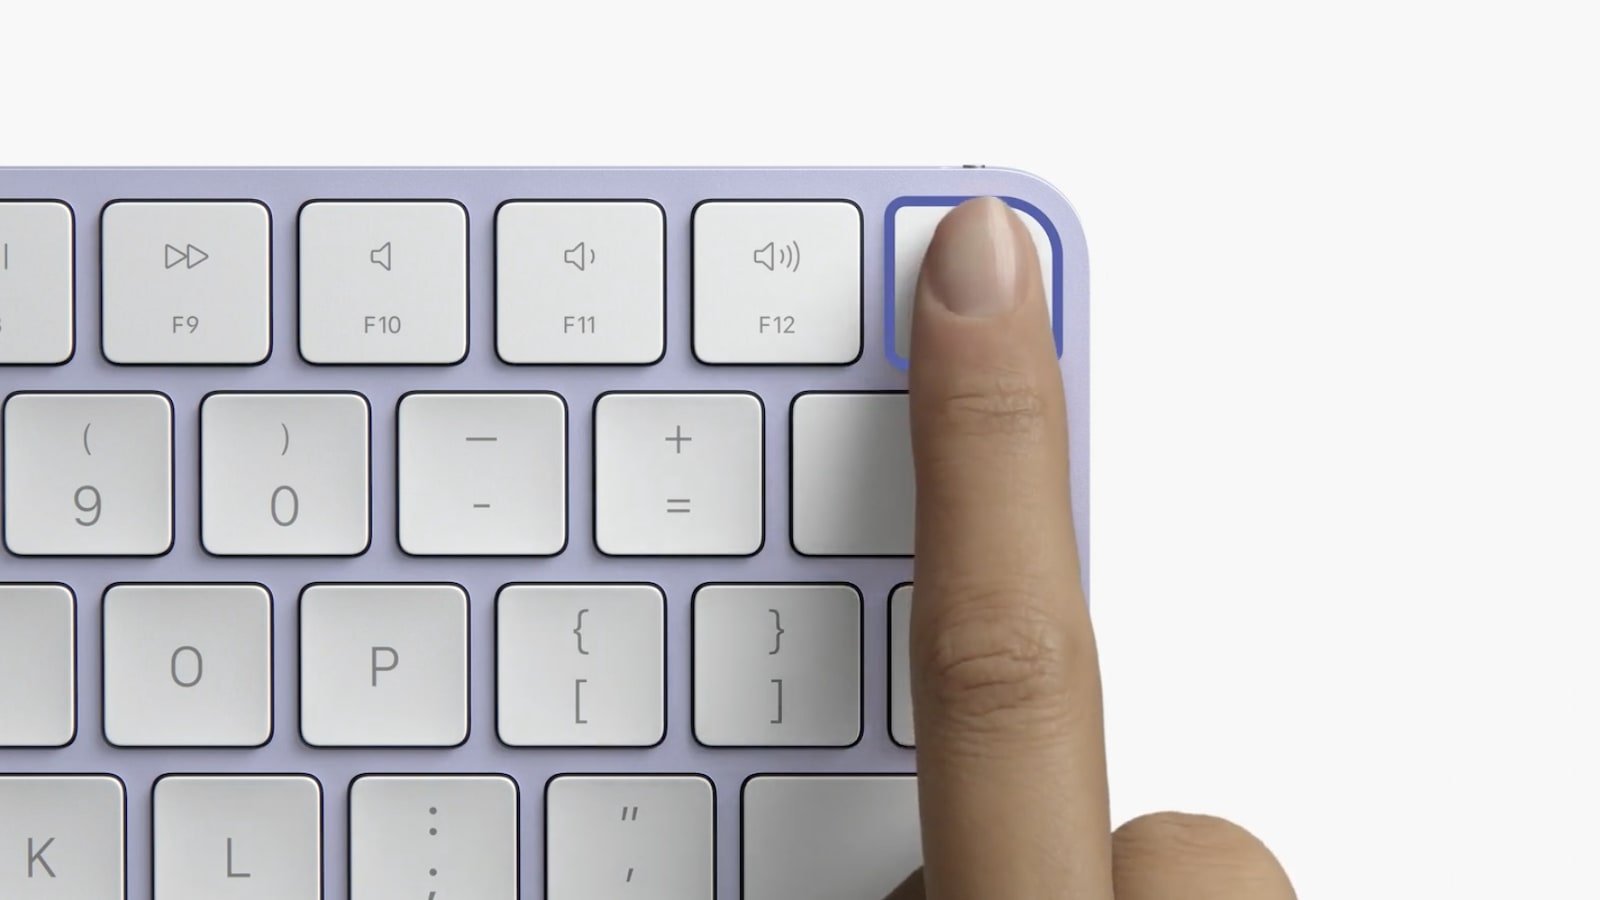 Apple Redesigned Magic Keyboard features Touch ID for privacy and new quick-tap buttons